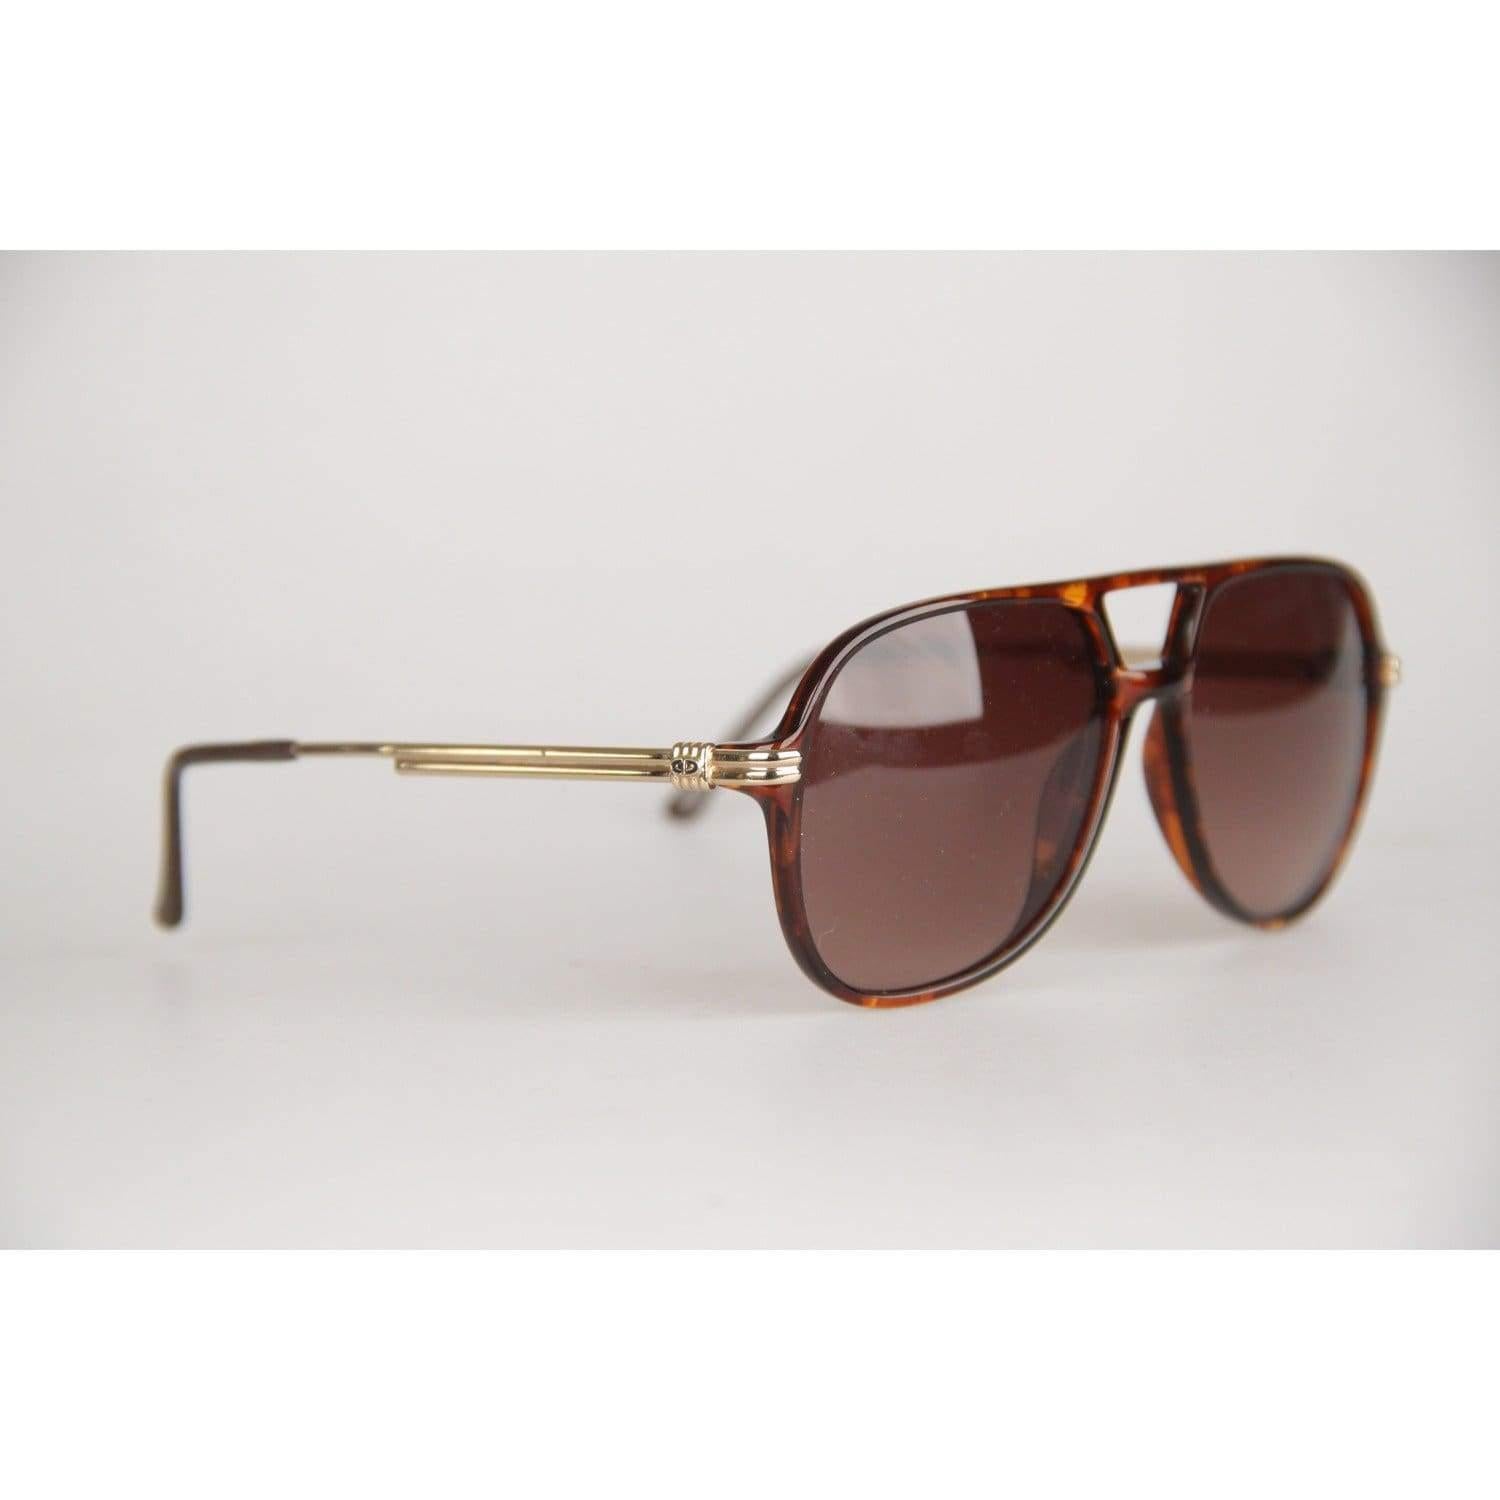 MATERIAL: Acetate COLOR: Brown MODEL: Aviator GENDER: Adult Unisex SIZE: Large COUNTRY OF MANUFACTURE: Germany Condition CONDITION DETAILS: NEW - NOS (NEW OLD STOCK) - They will come with a Generic Case Measurements MEASUREMENTS: TEMPLE MAX. LENGTH: